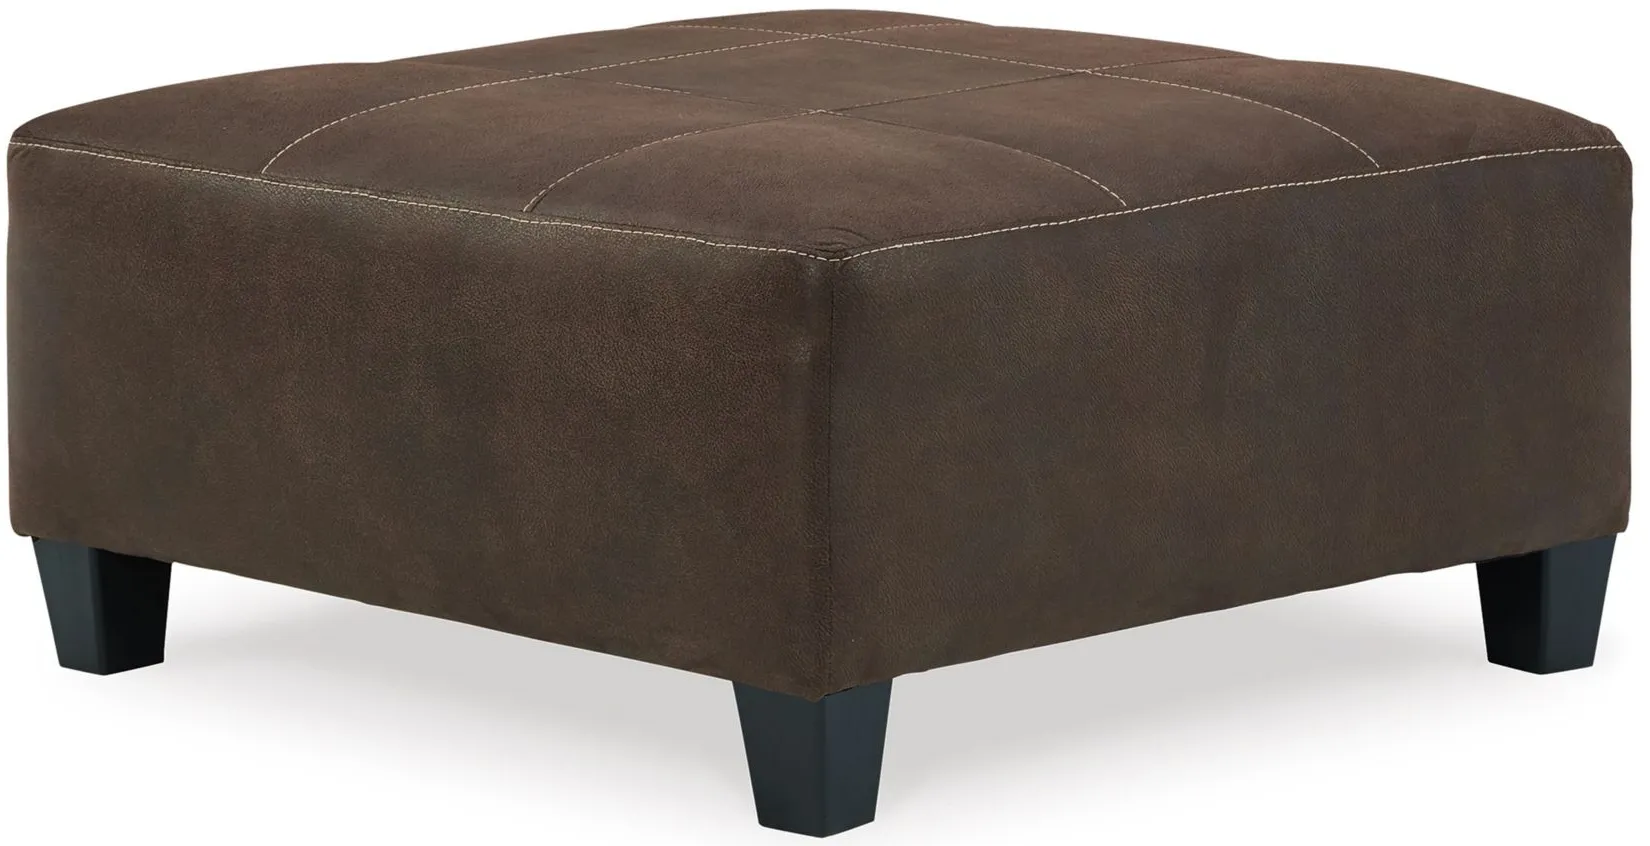 Navi Oversized Accent Ottoman in Chestnut by Ashley Furniture